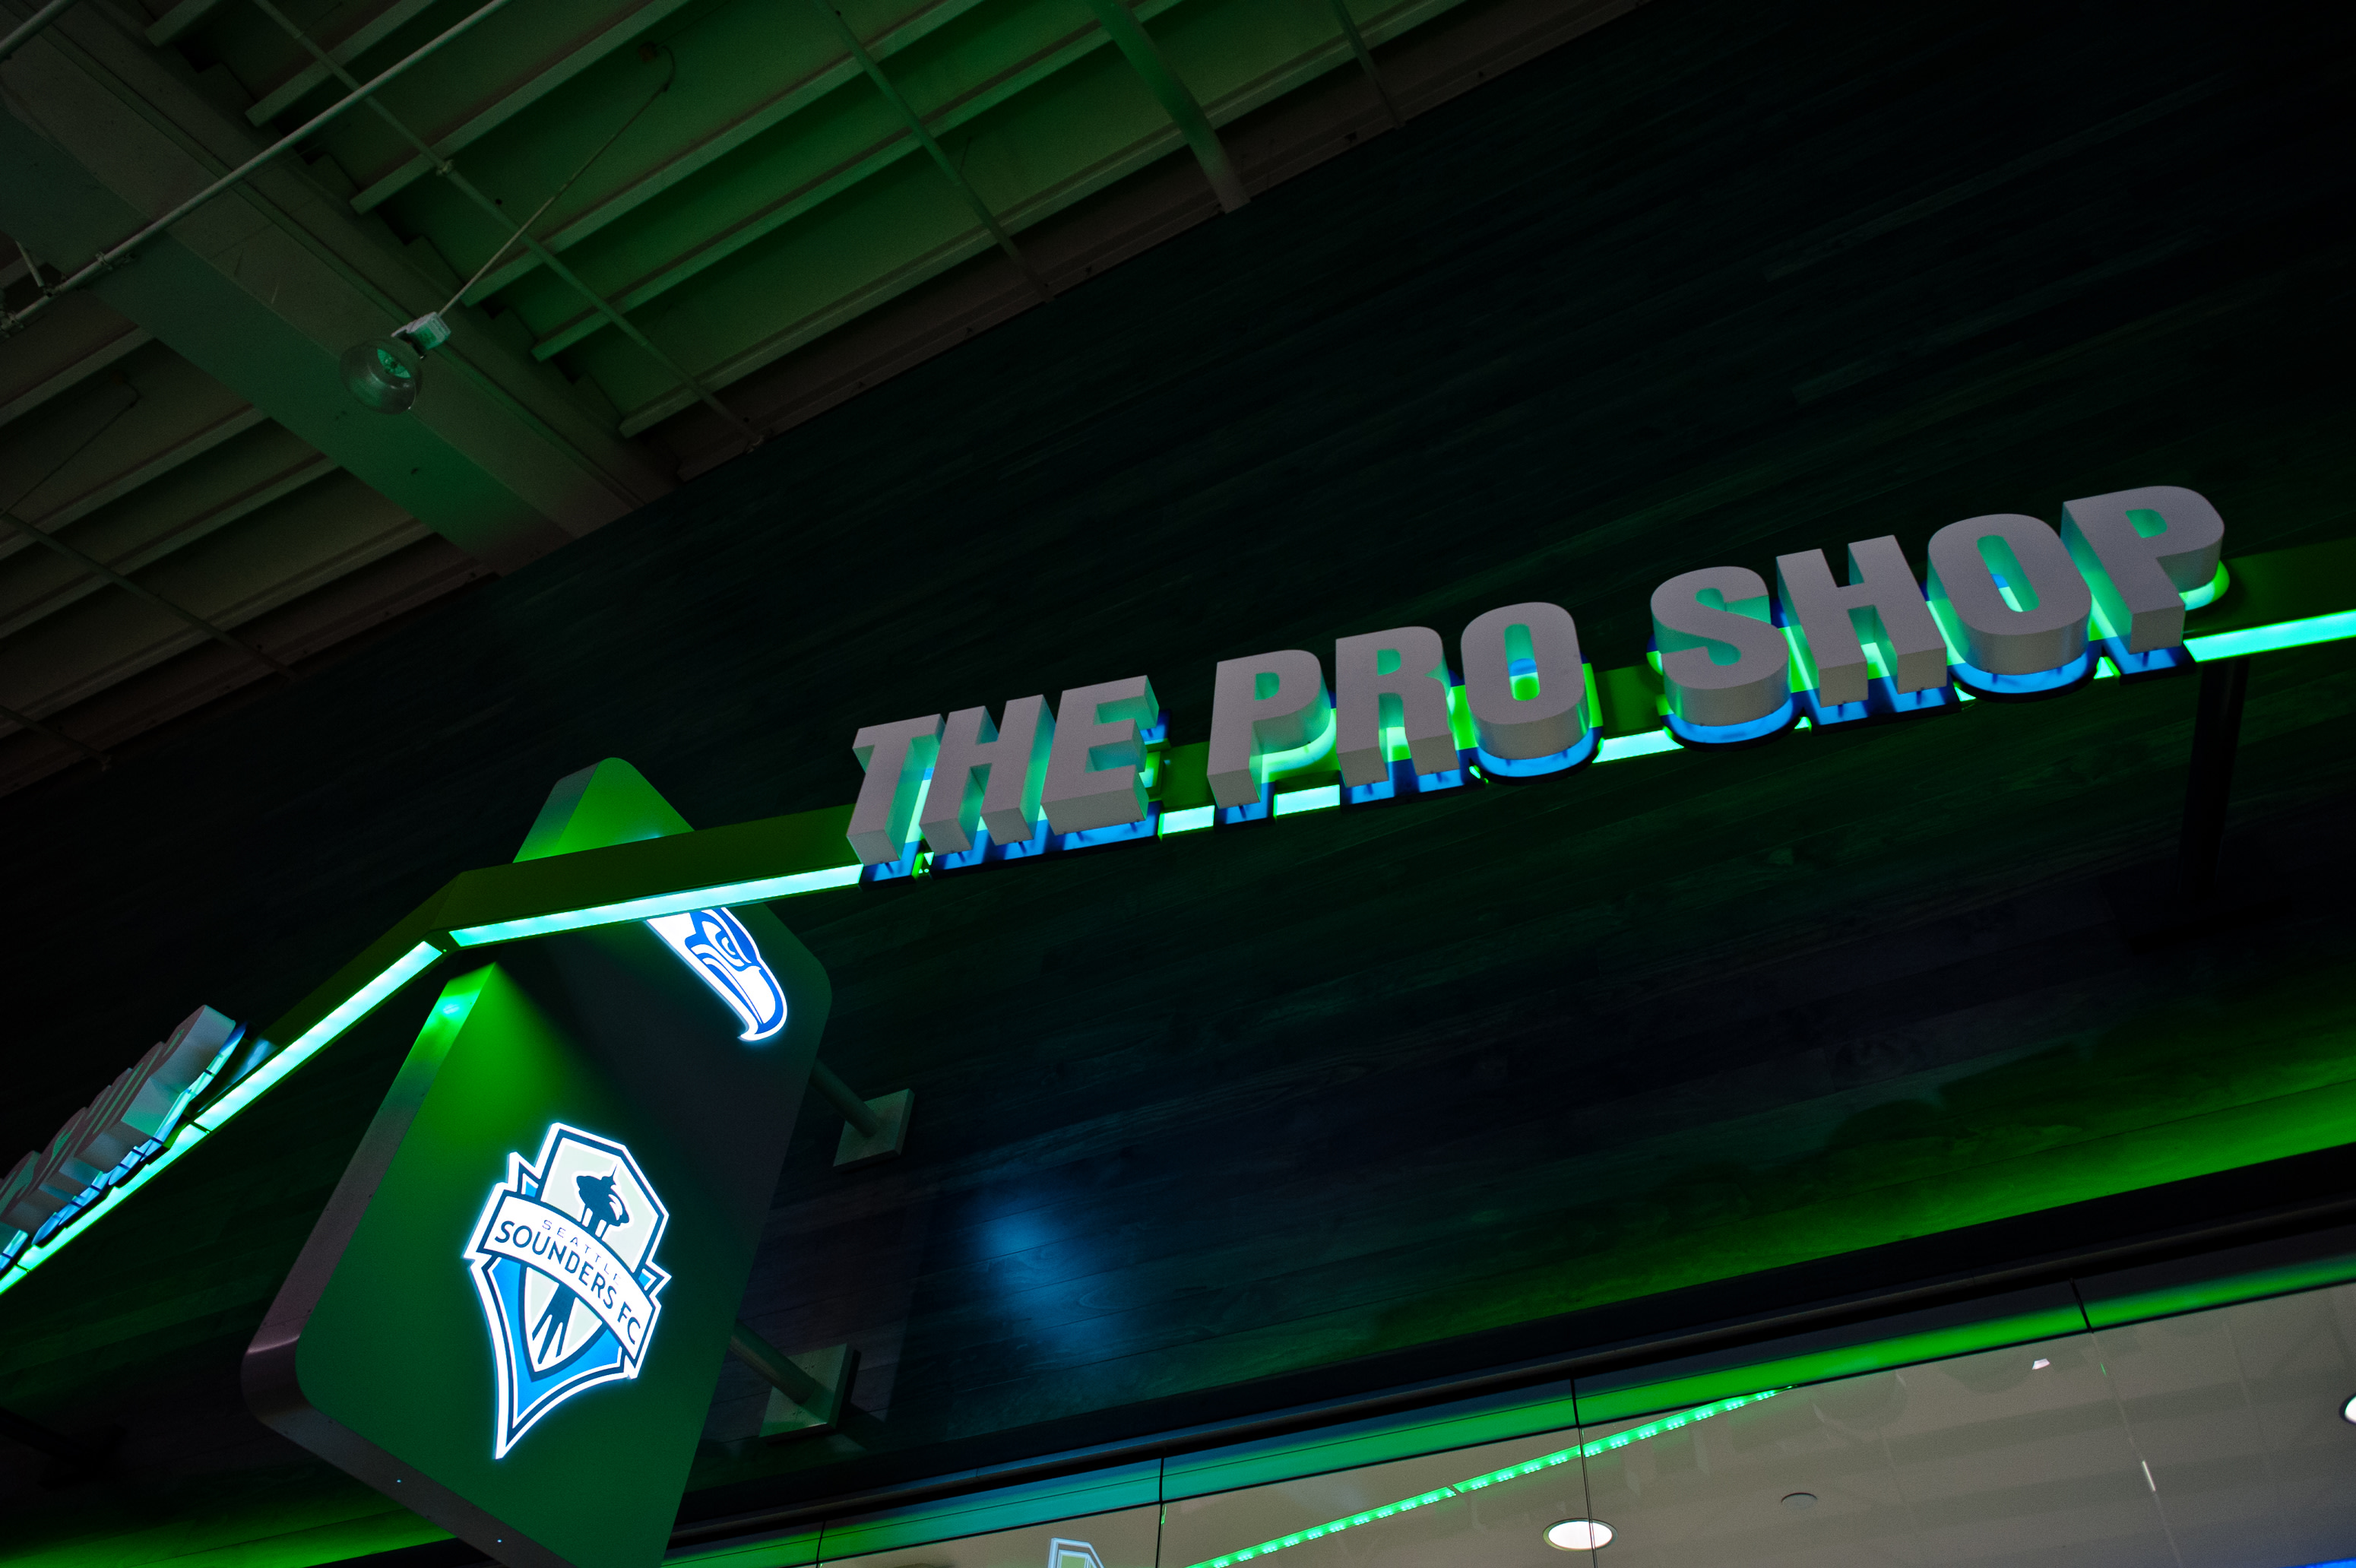 Sounders FC and Seahawks open newly remodeled store at Alderwood